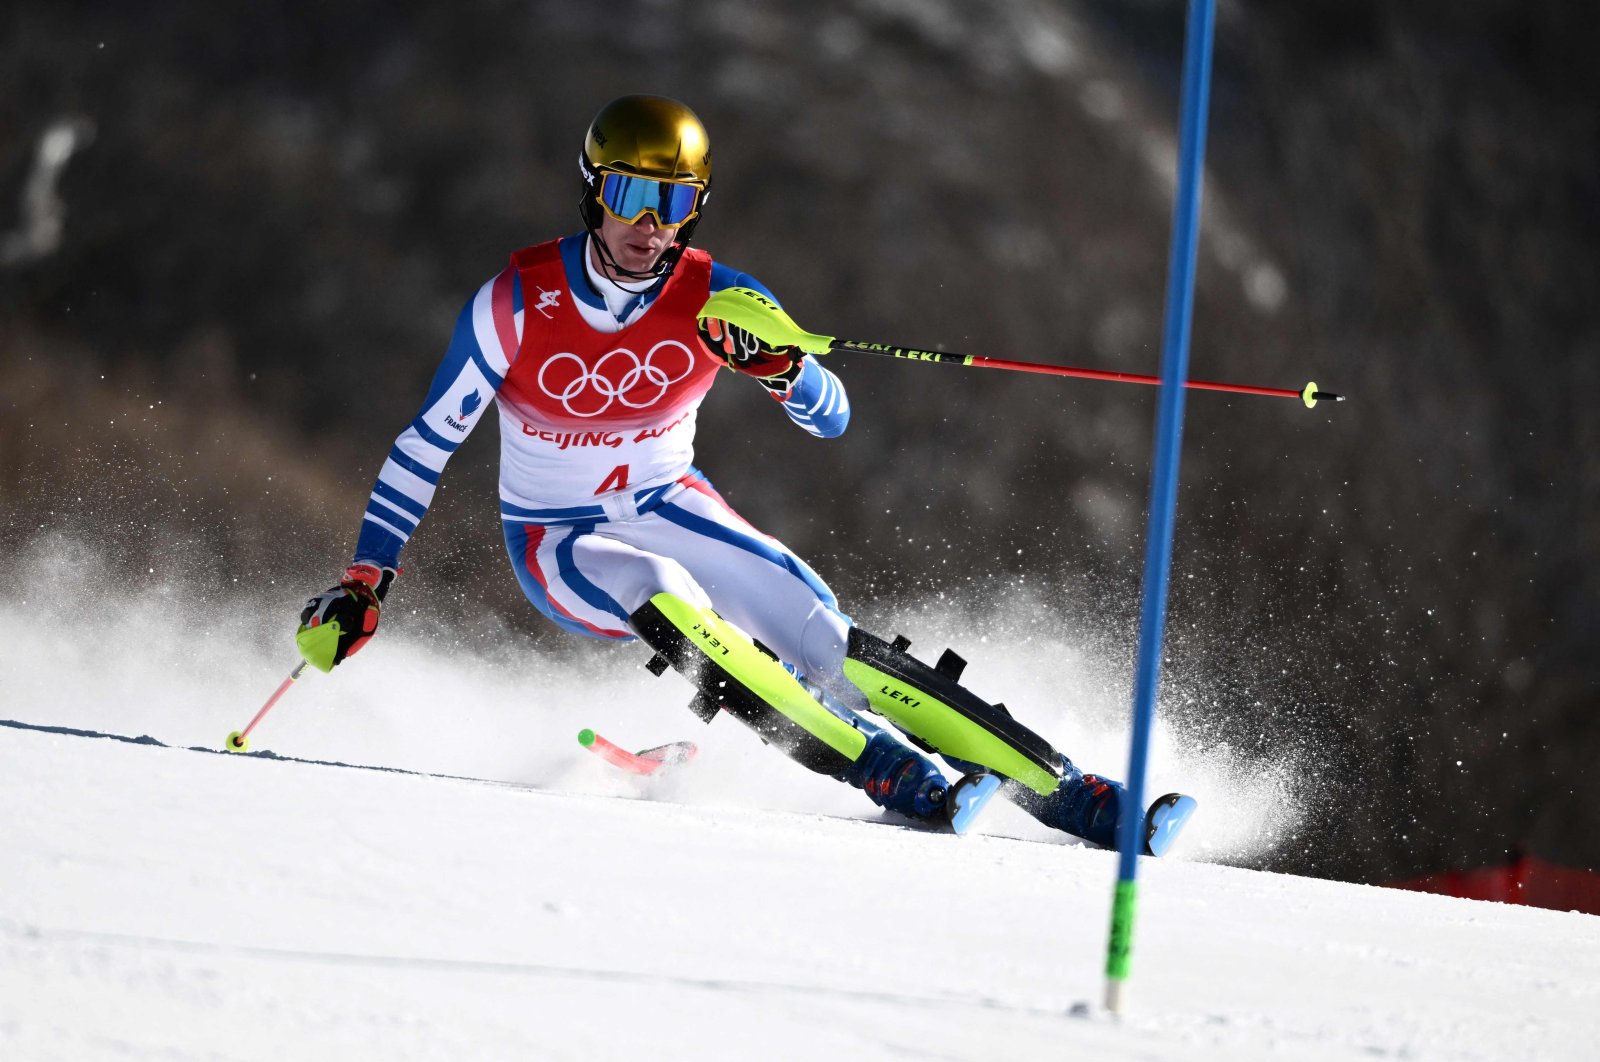 France&#039;s Clement Noel competes in the first run of the men&#039;s slalom during the Beijing 2022 Winter Olympic Games, Yanqing, China, Feb. 16, 2022. (AFP Photo)